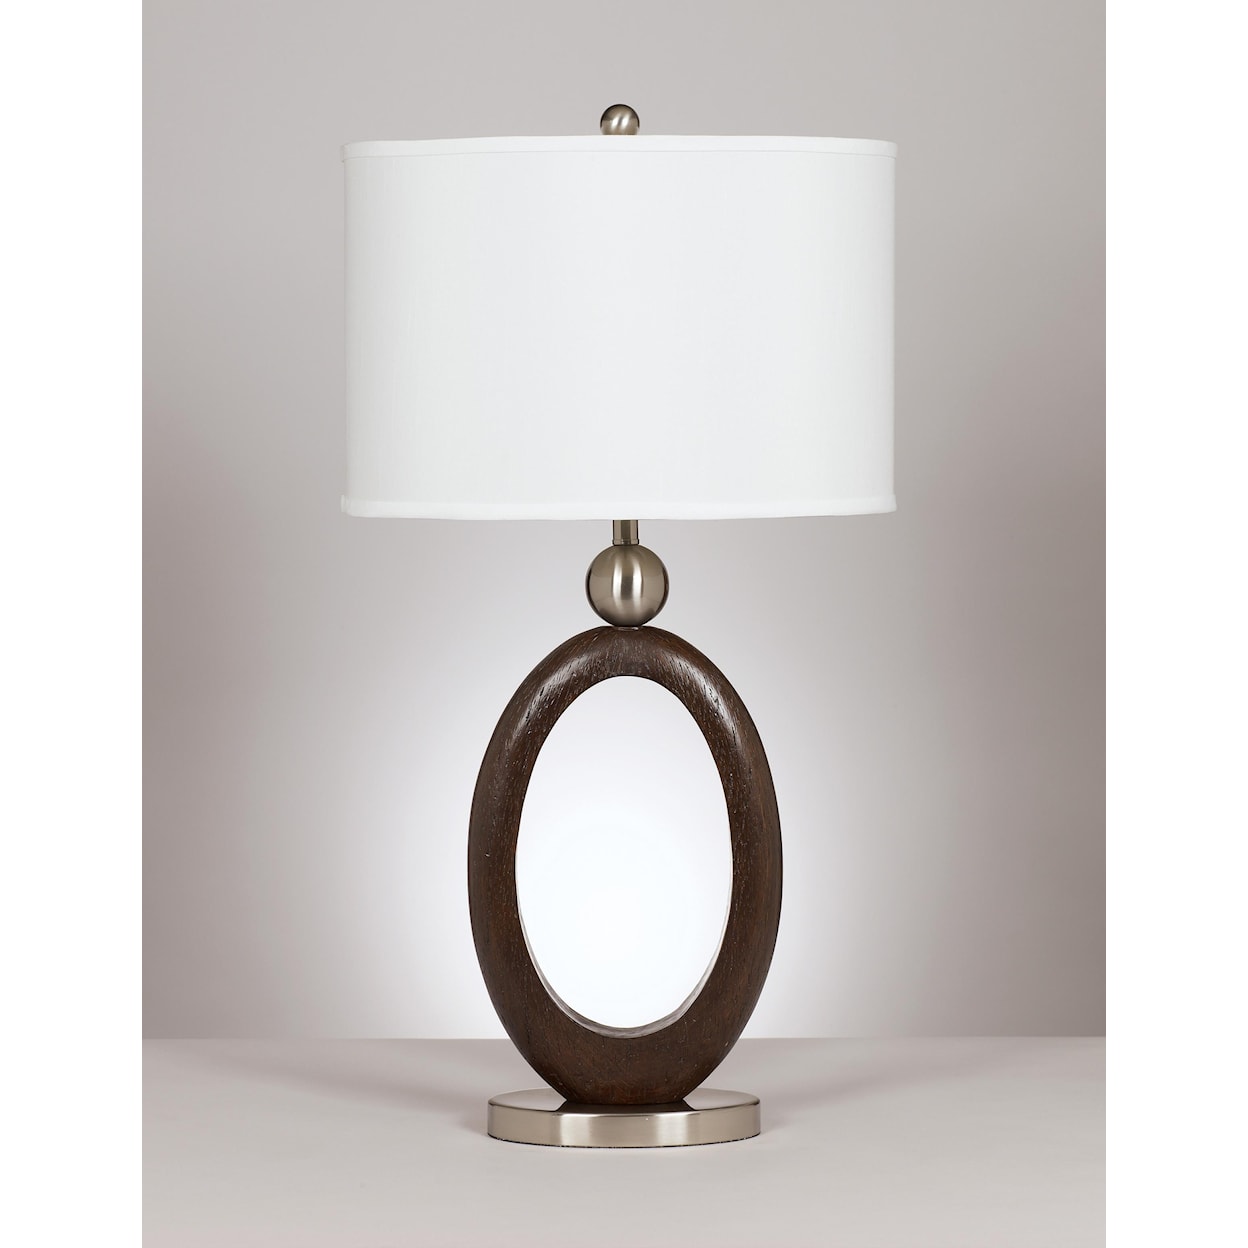 Sam's Furniture Ashley Lamps Meckenzie Table Lamp